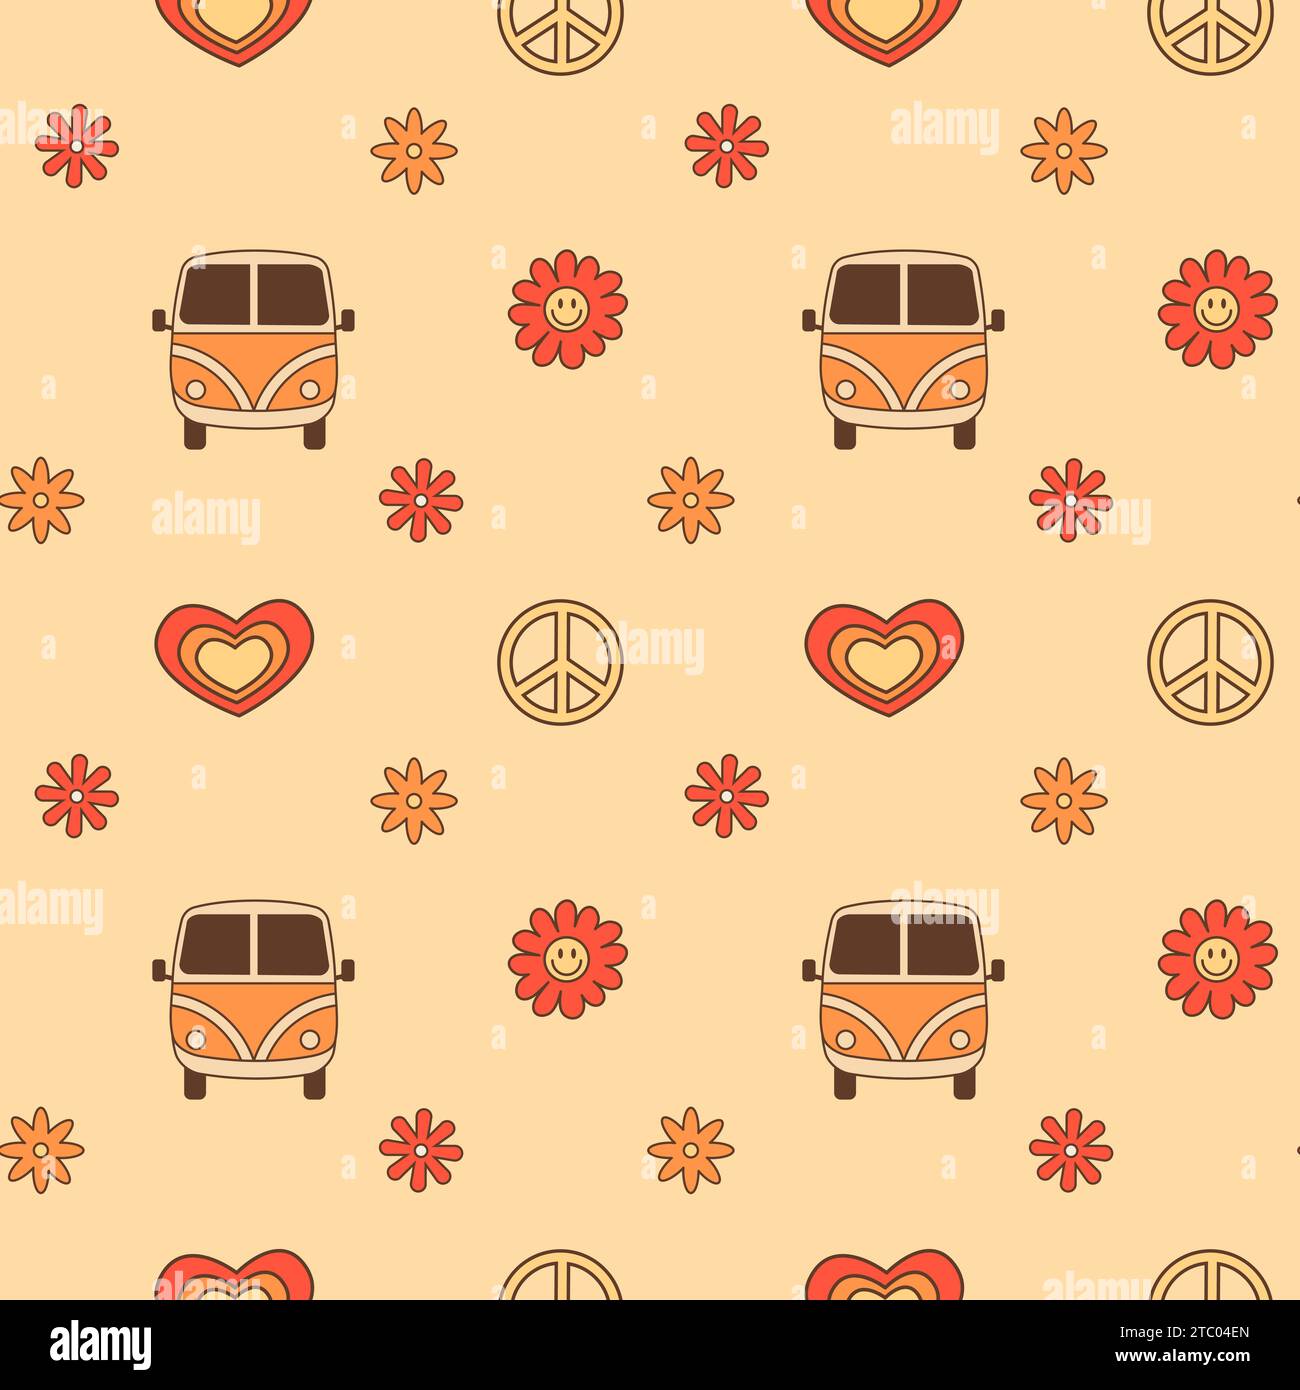 Retro seamless pattern with vintage camper van, smiling flowers and peace sign. Retro hippie culture inspired background with 70s 80s nostalgia comic Stock Vector